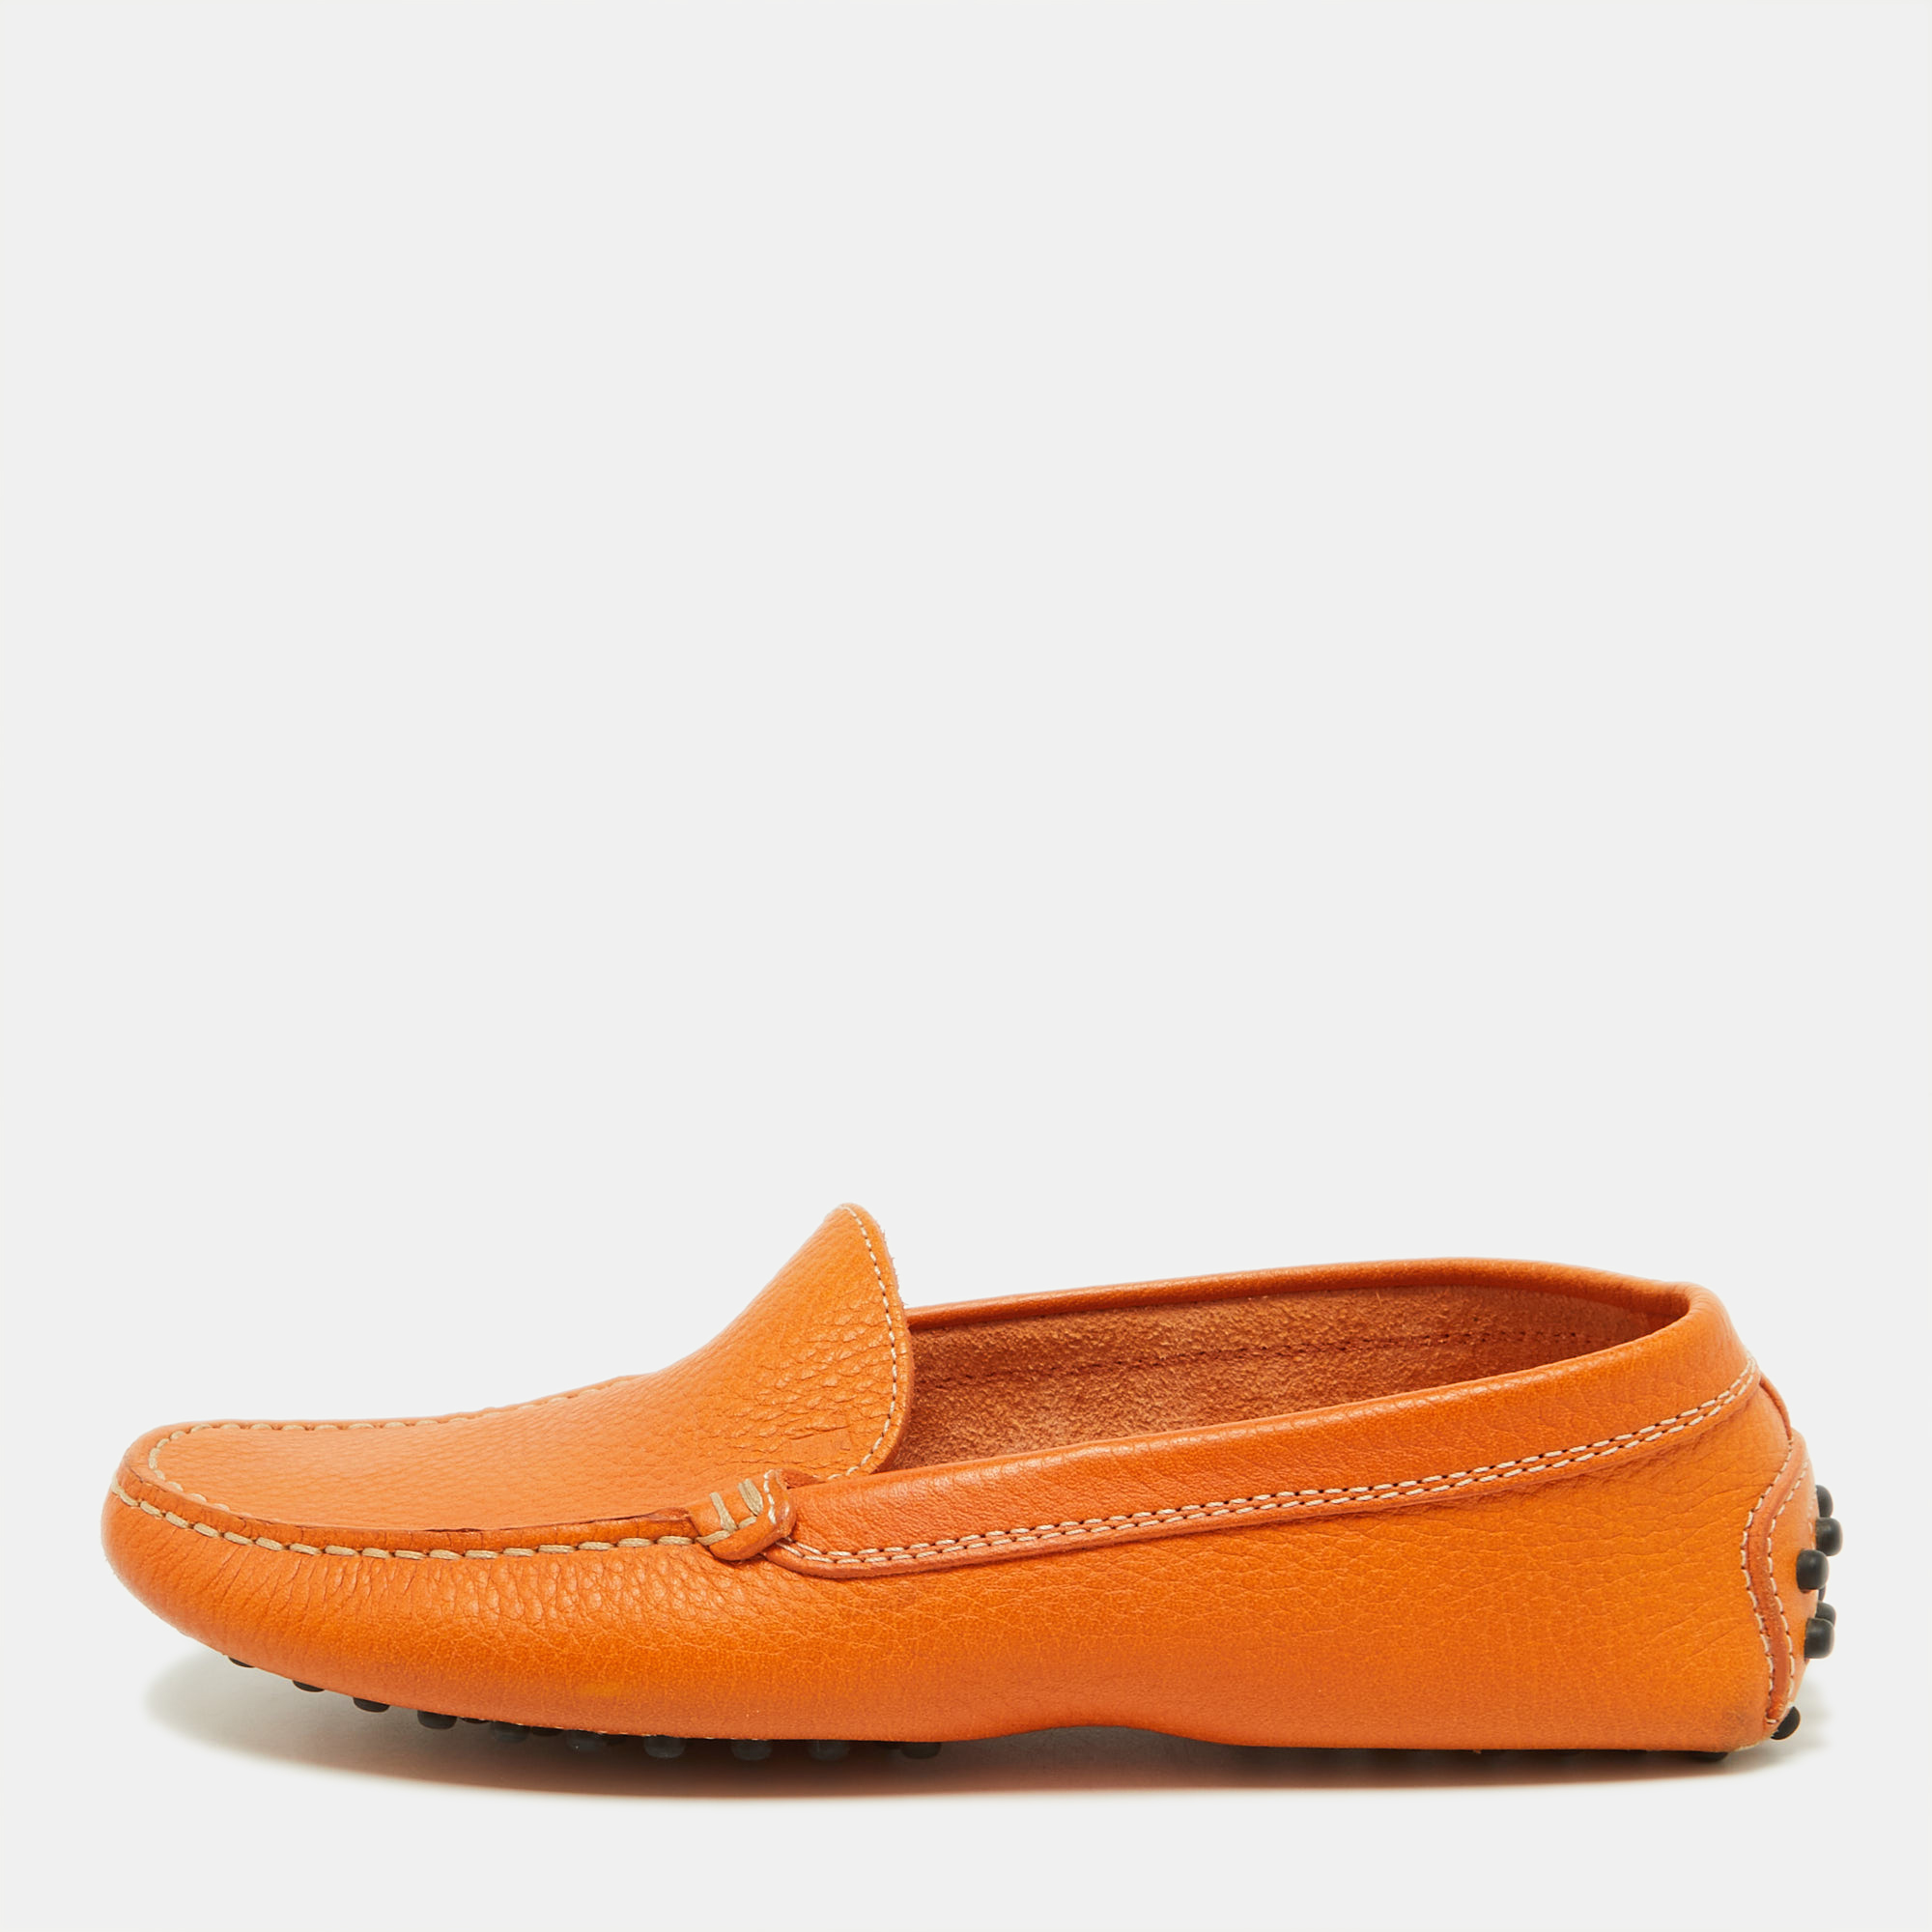 Tod's Orange Leather Penny Slip On Loafers Size 35.5